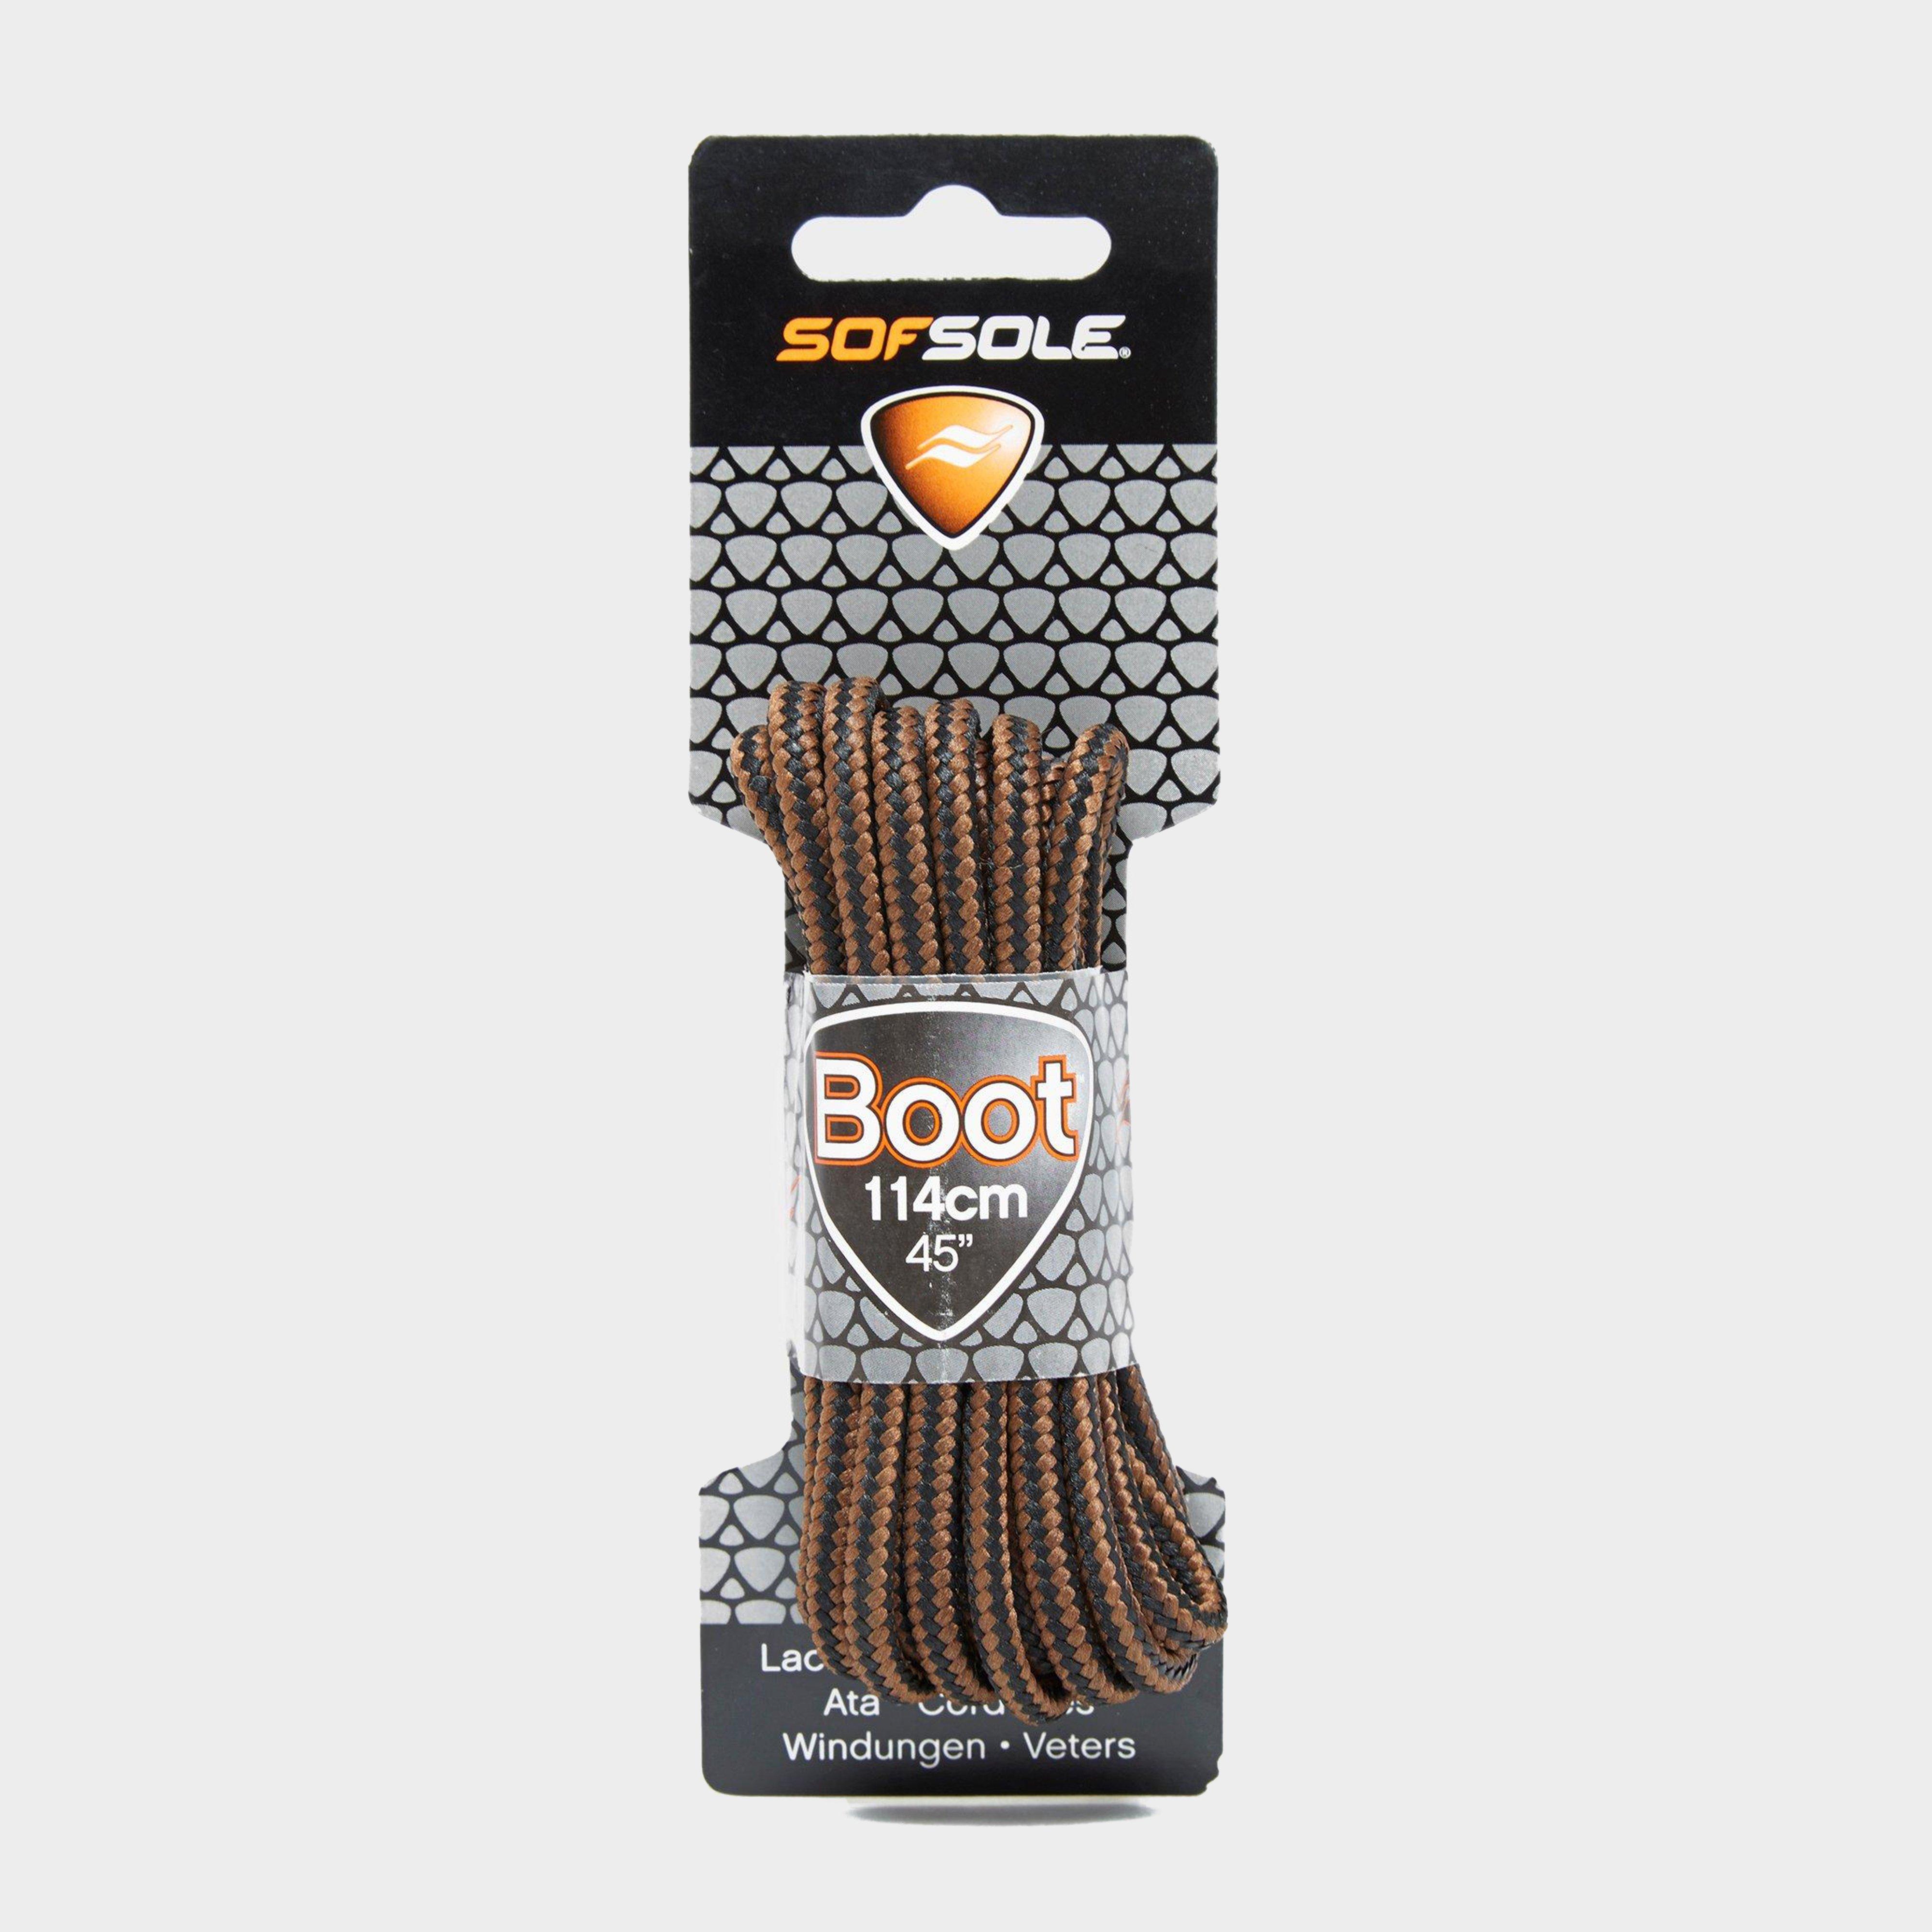 Sof Sole Wax Boot Laces - 114cm  Brown